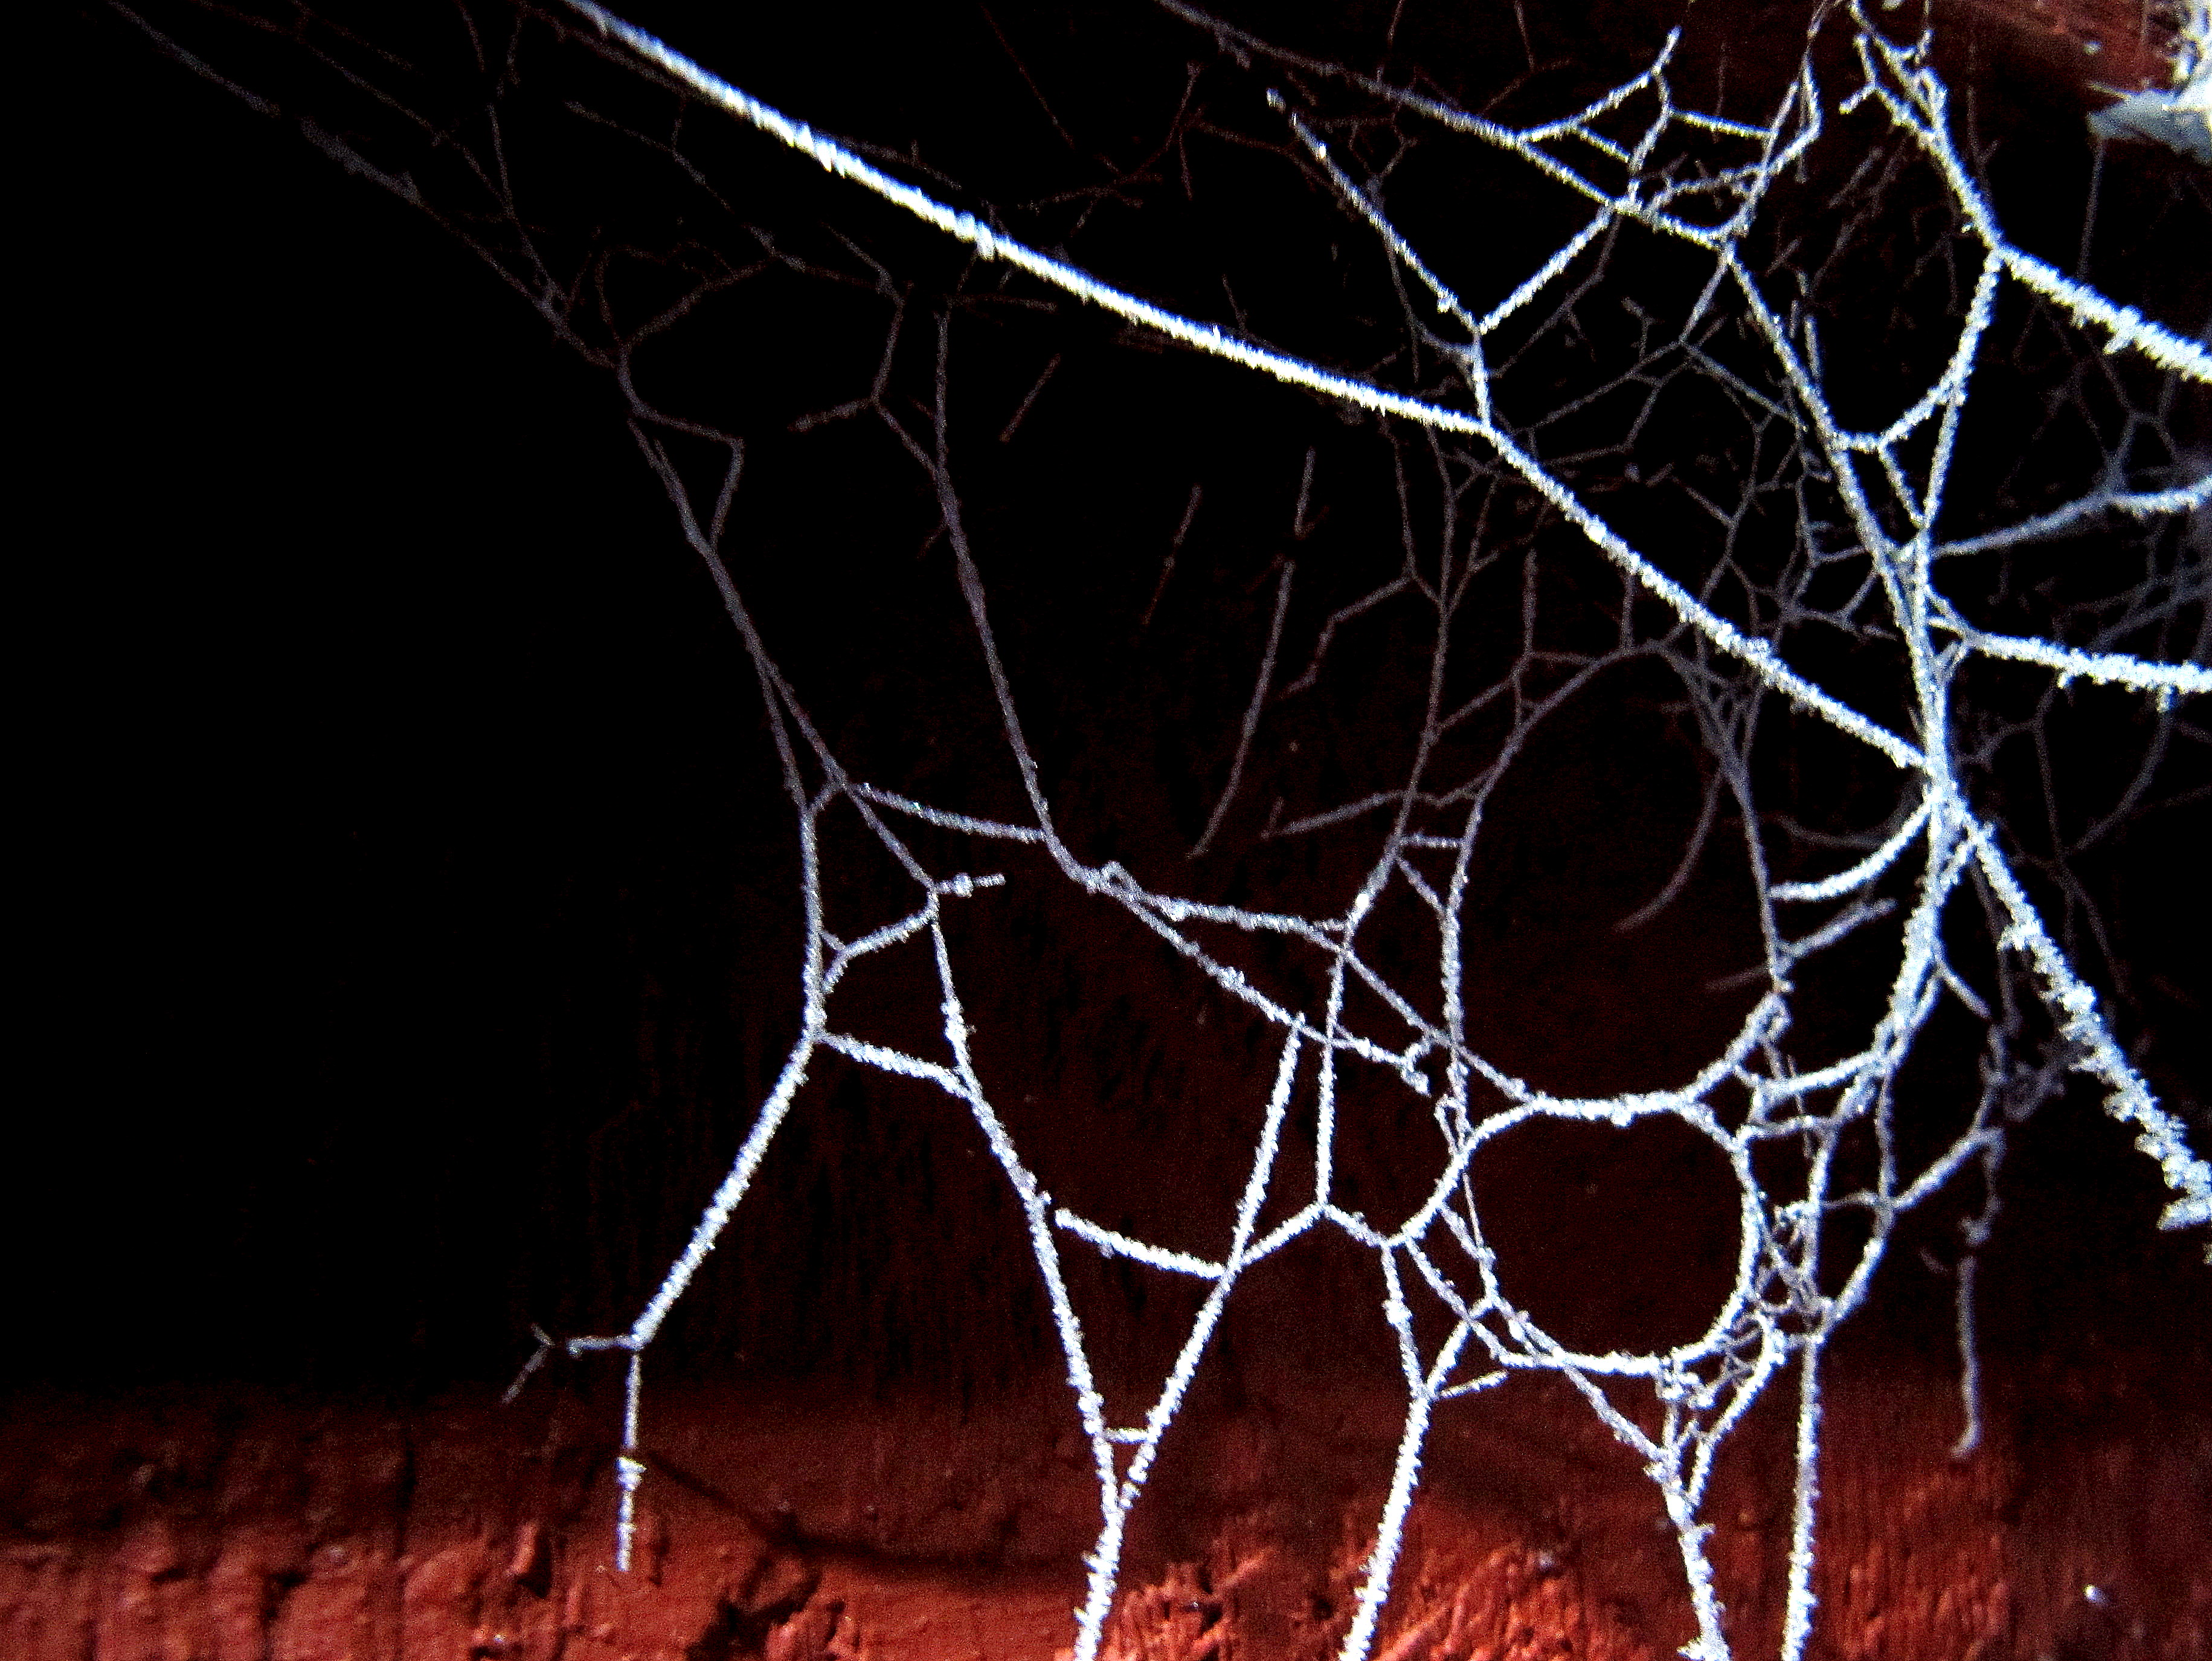 Frozen Spider Web | Not From Lapland